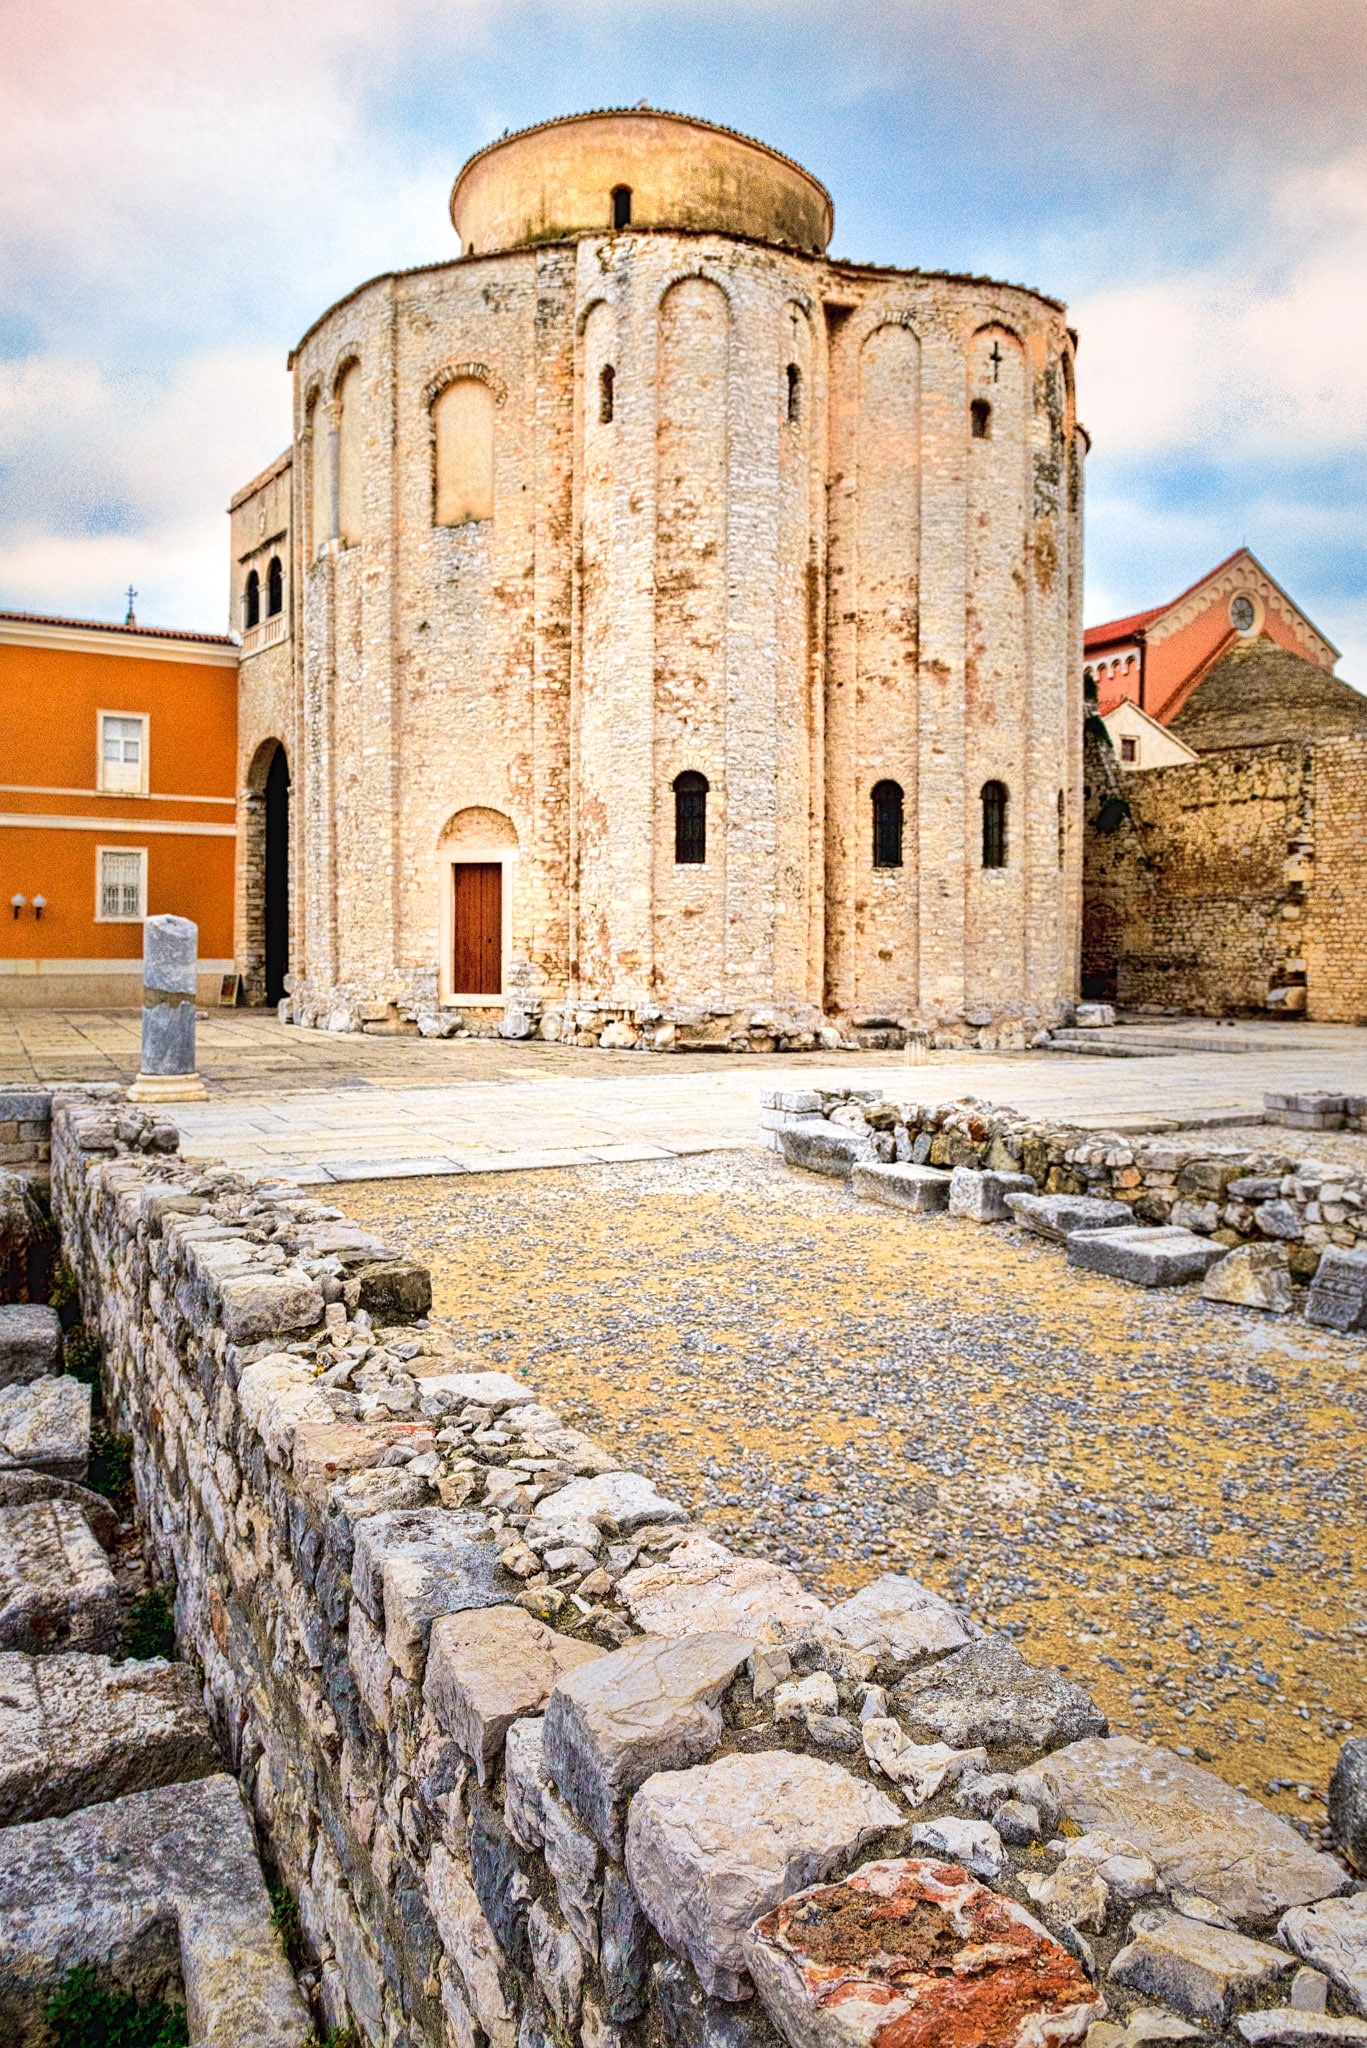 A view of the Romanesque Church of St. Donatus adjacent to remnants of the Roman forum in the Illyrian city of Zadar in Croatia.